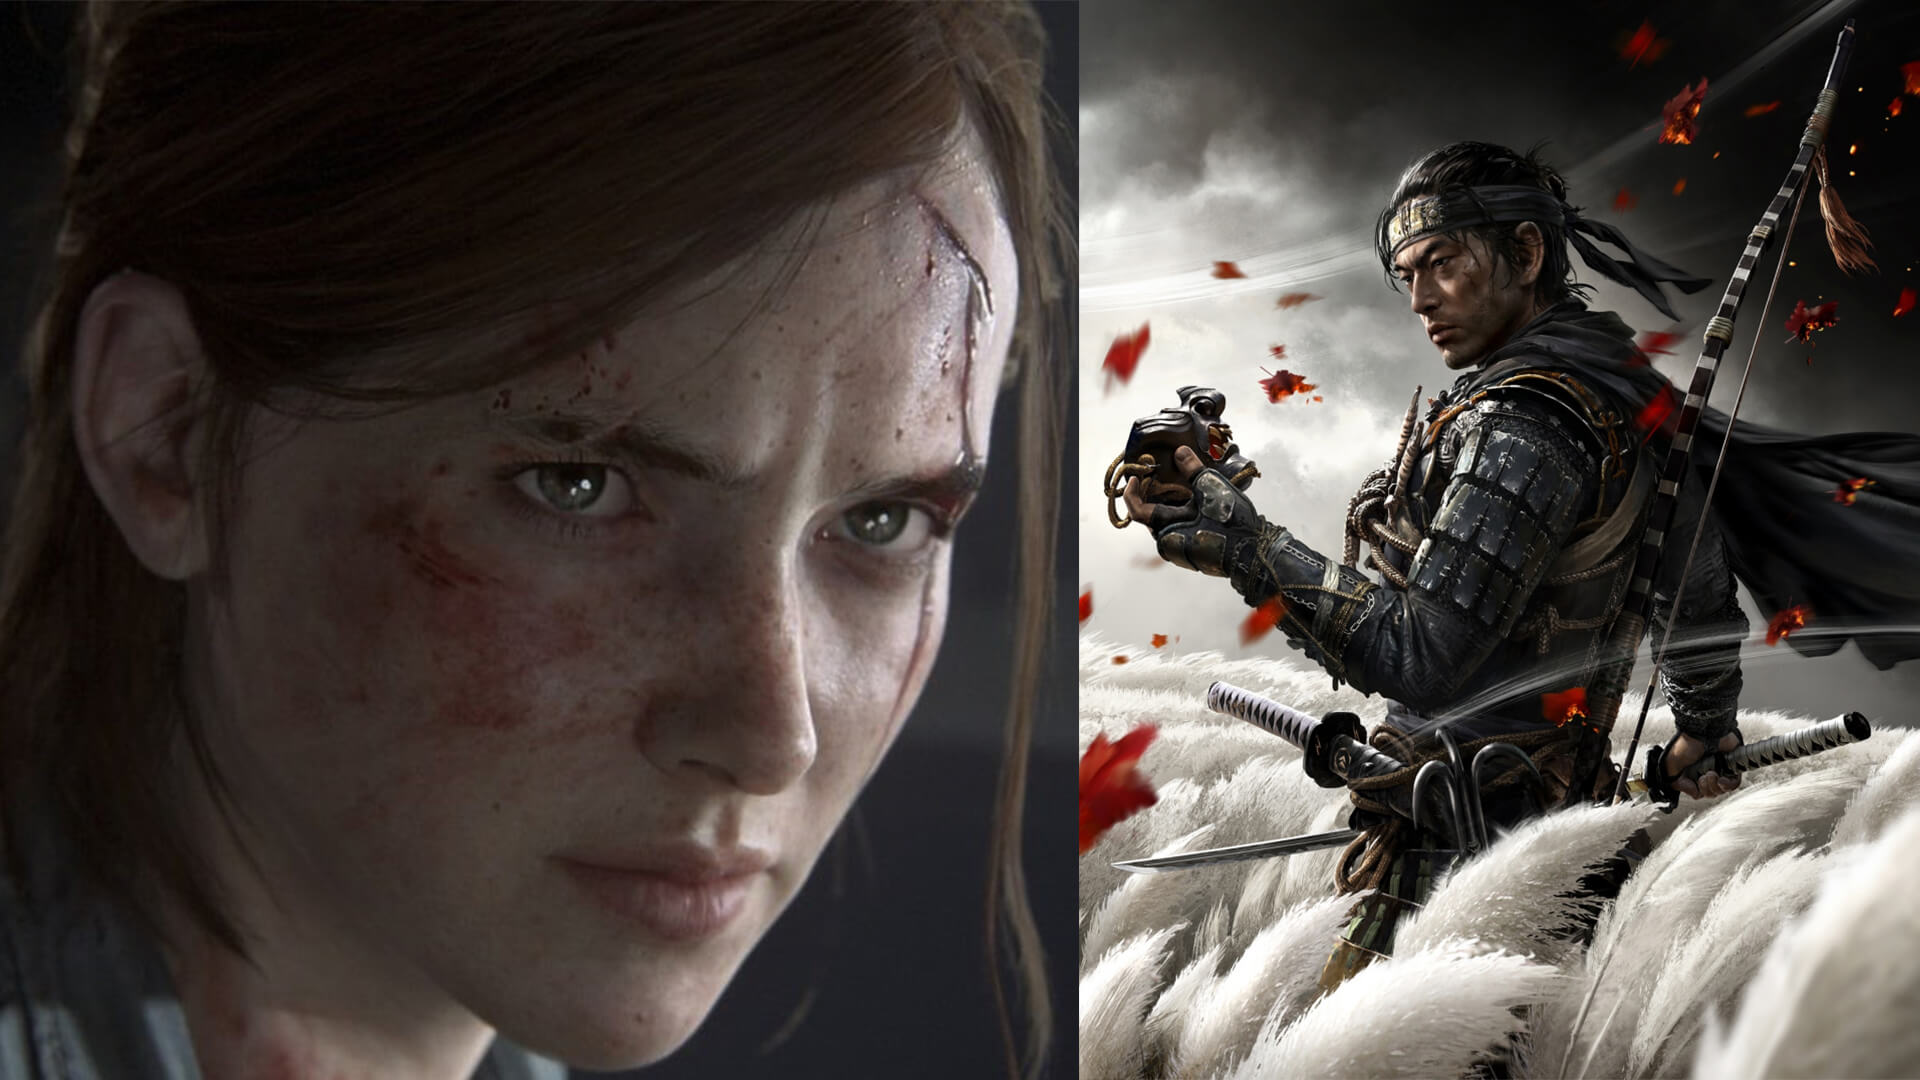 The Last of Us 2 and Ghost of Tsushima